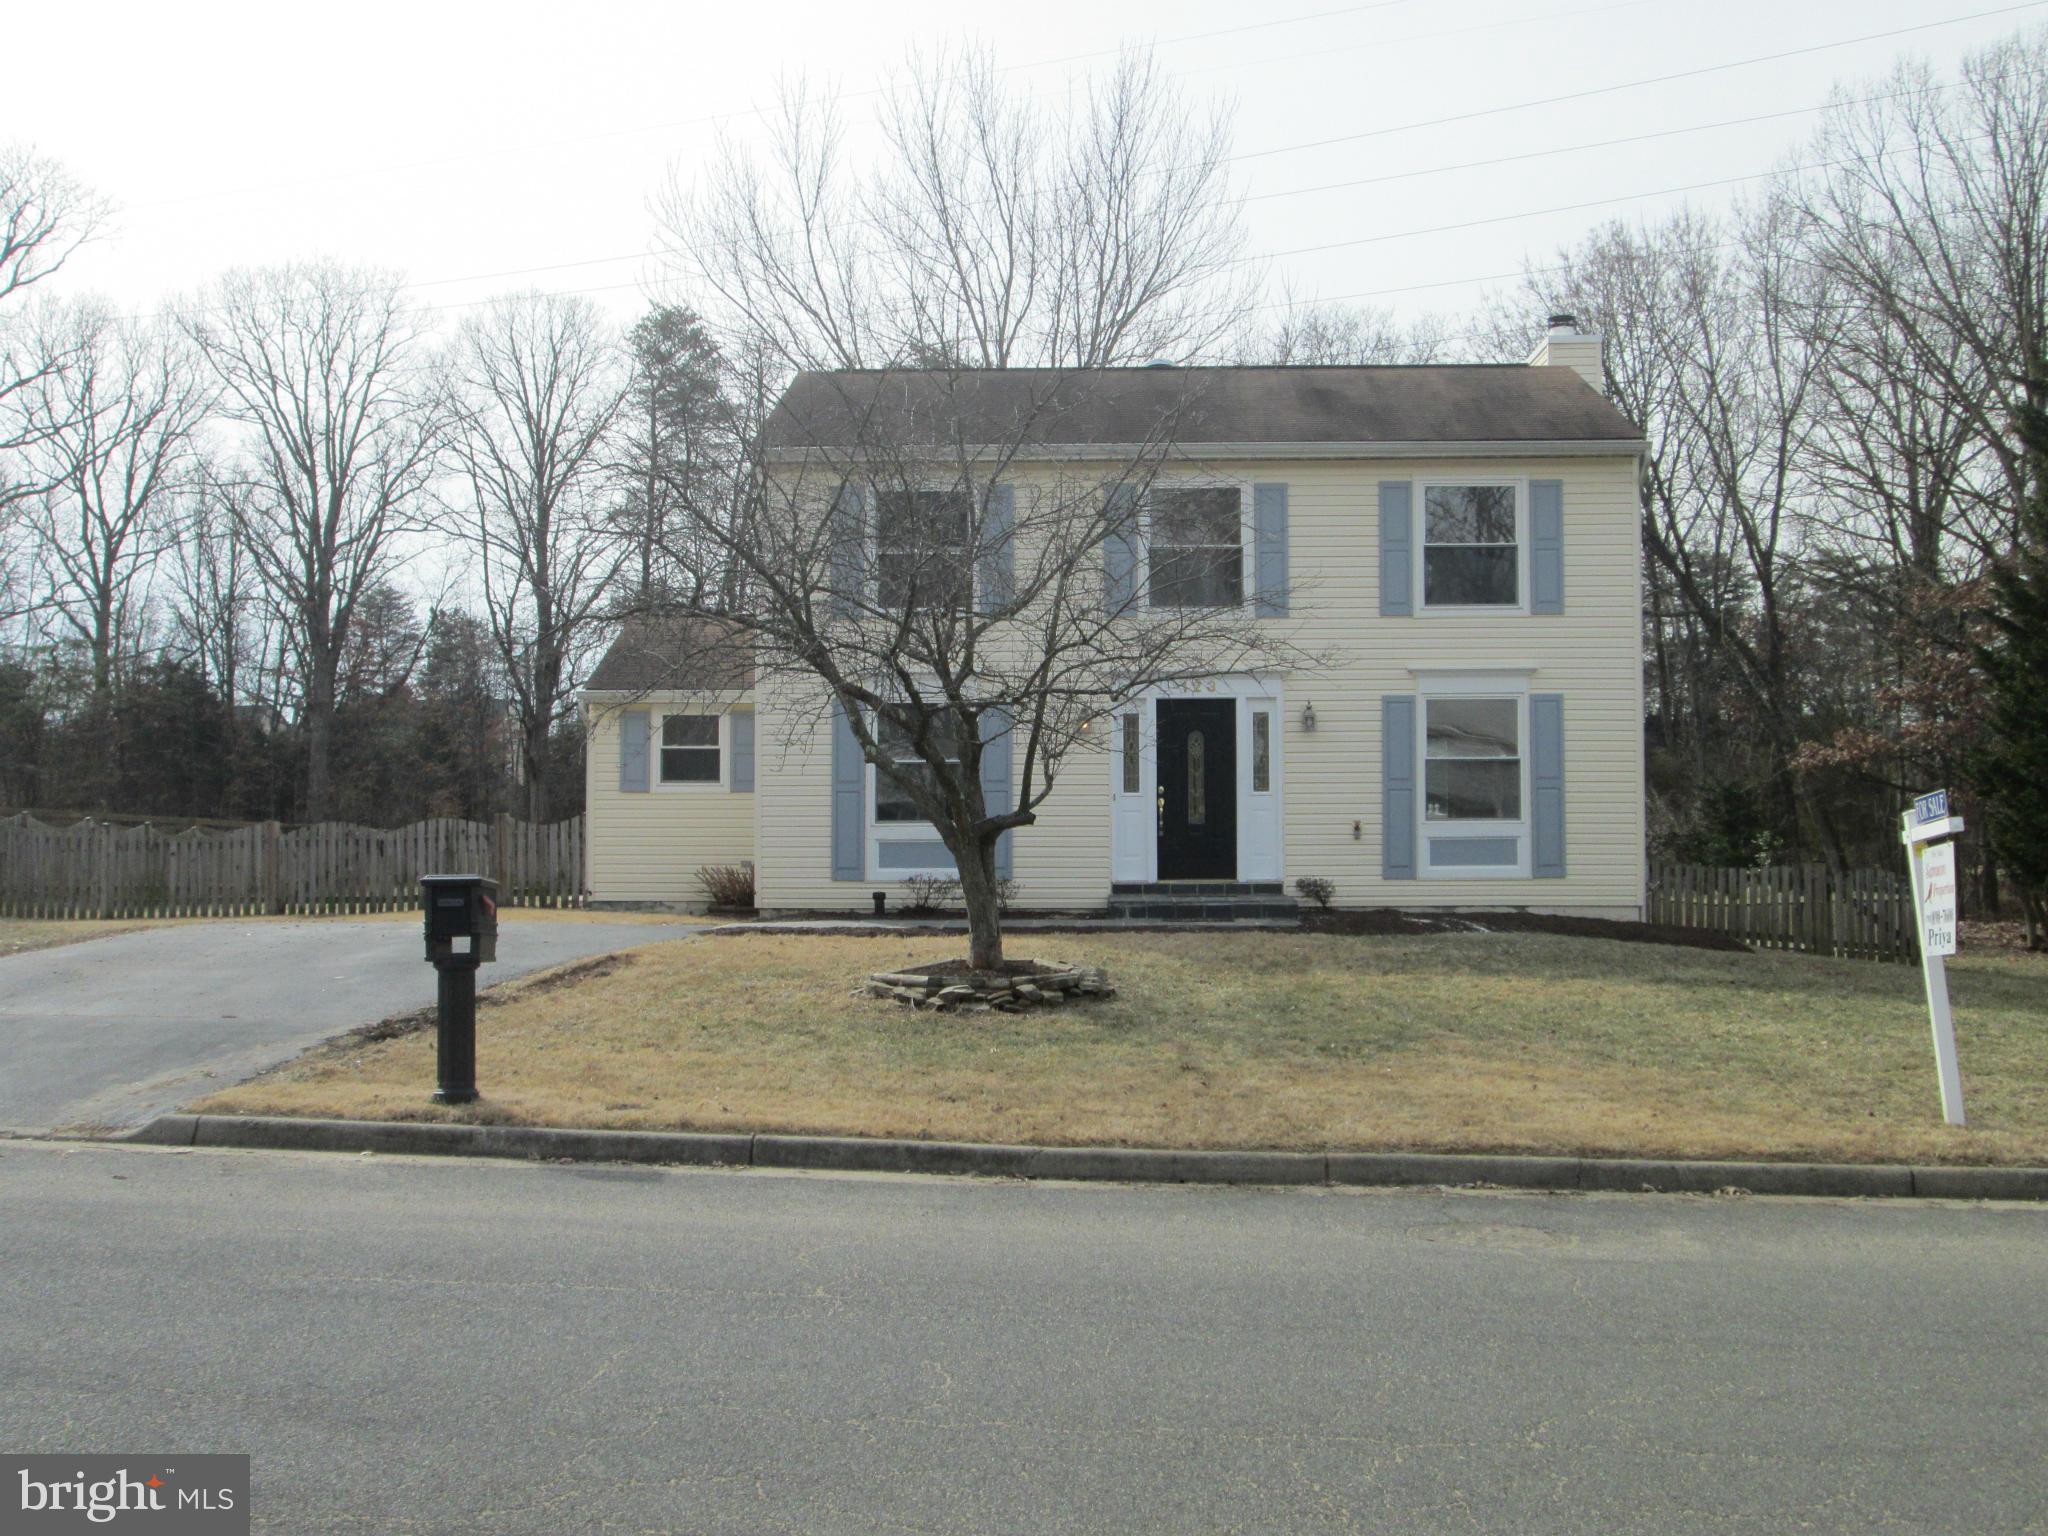 a view of the house with a street